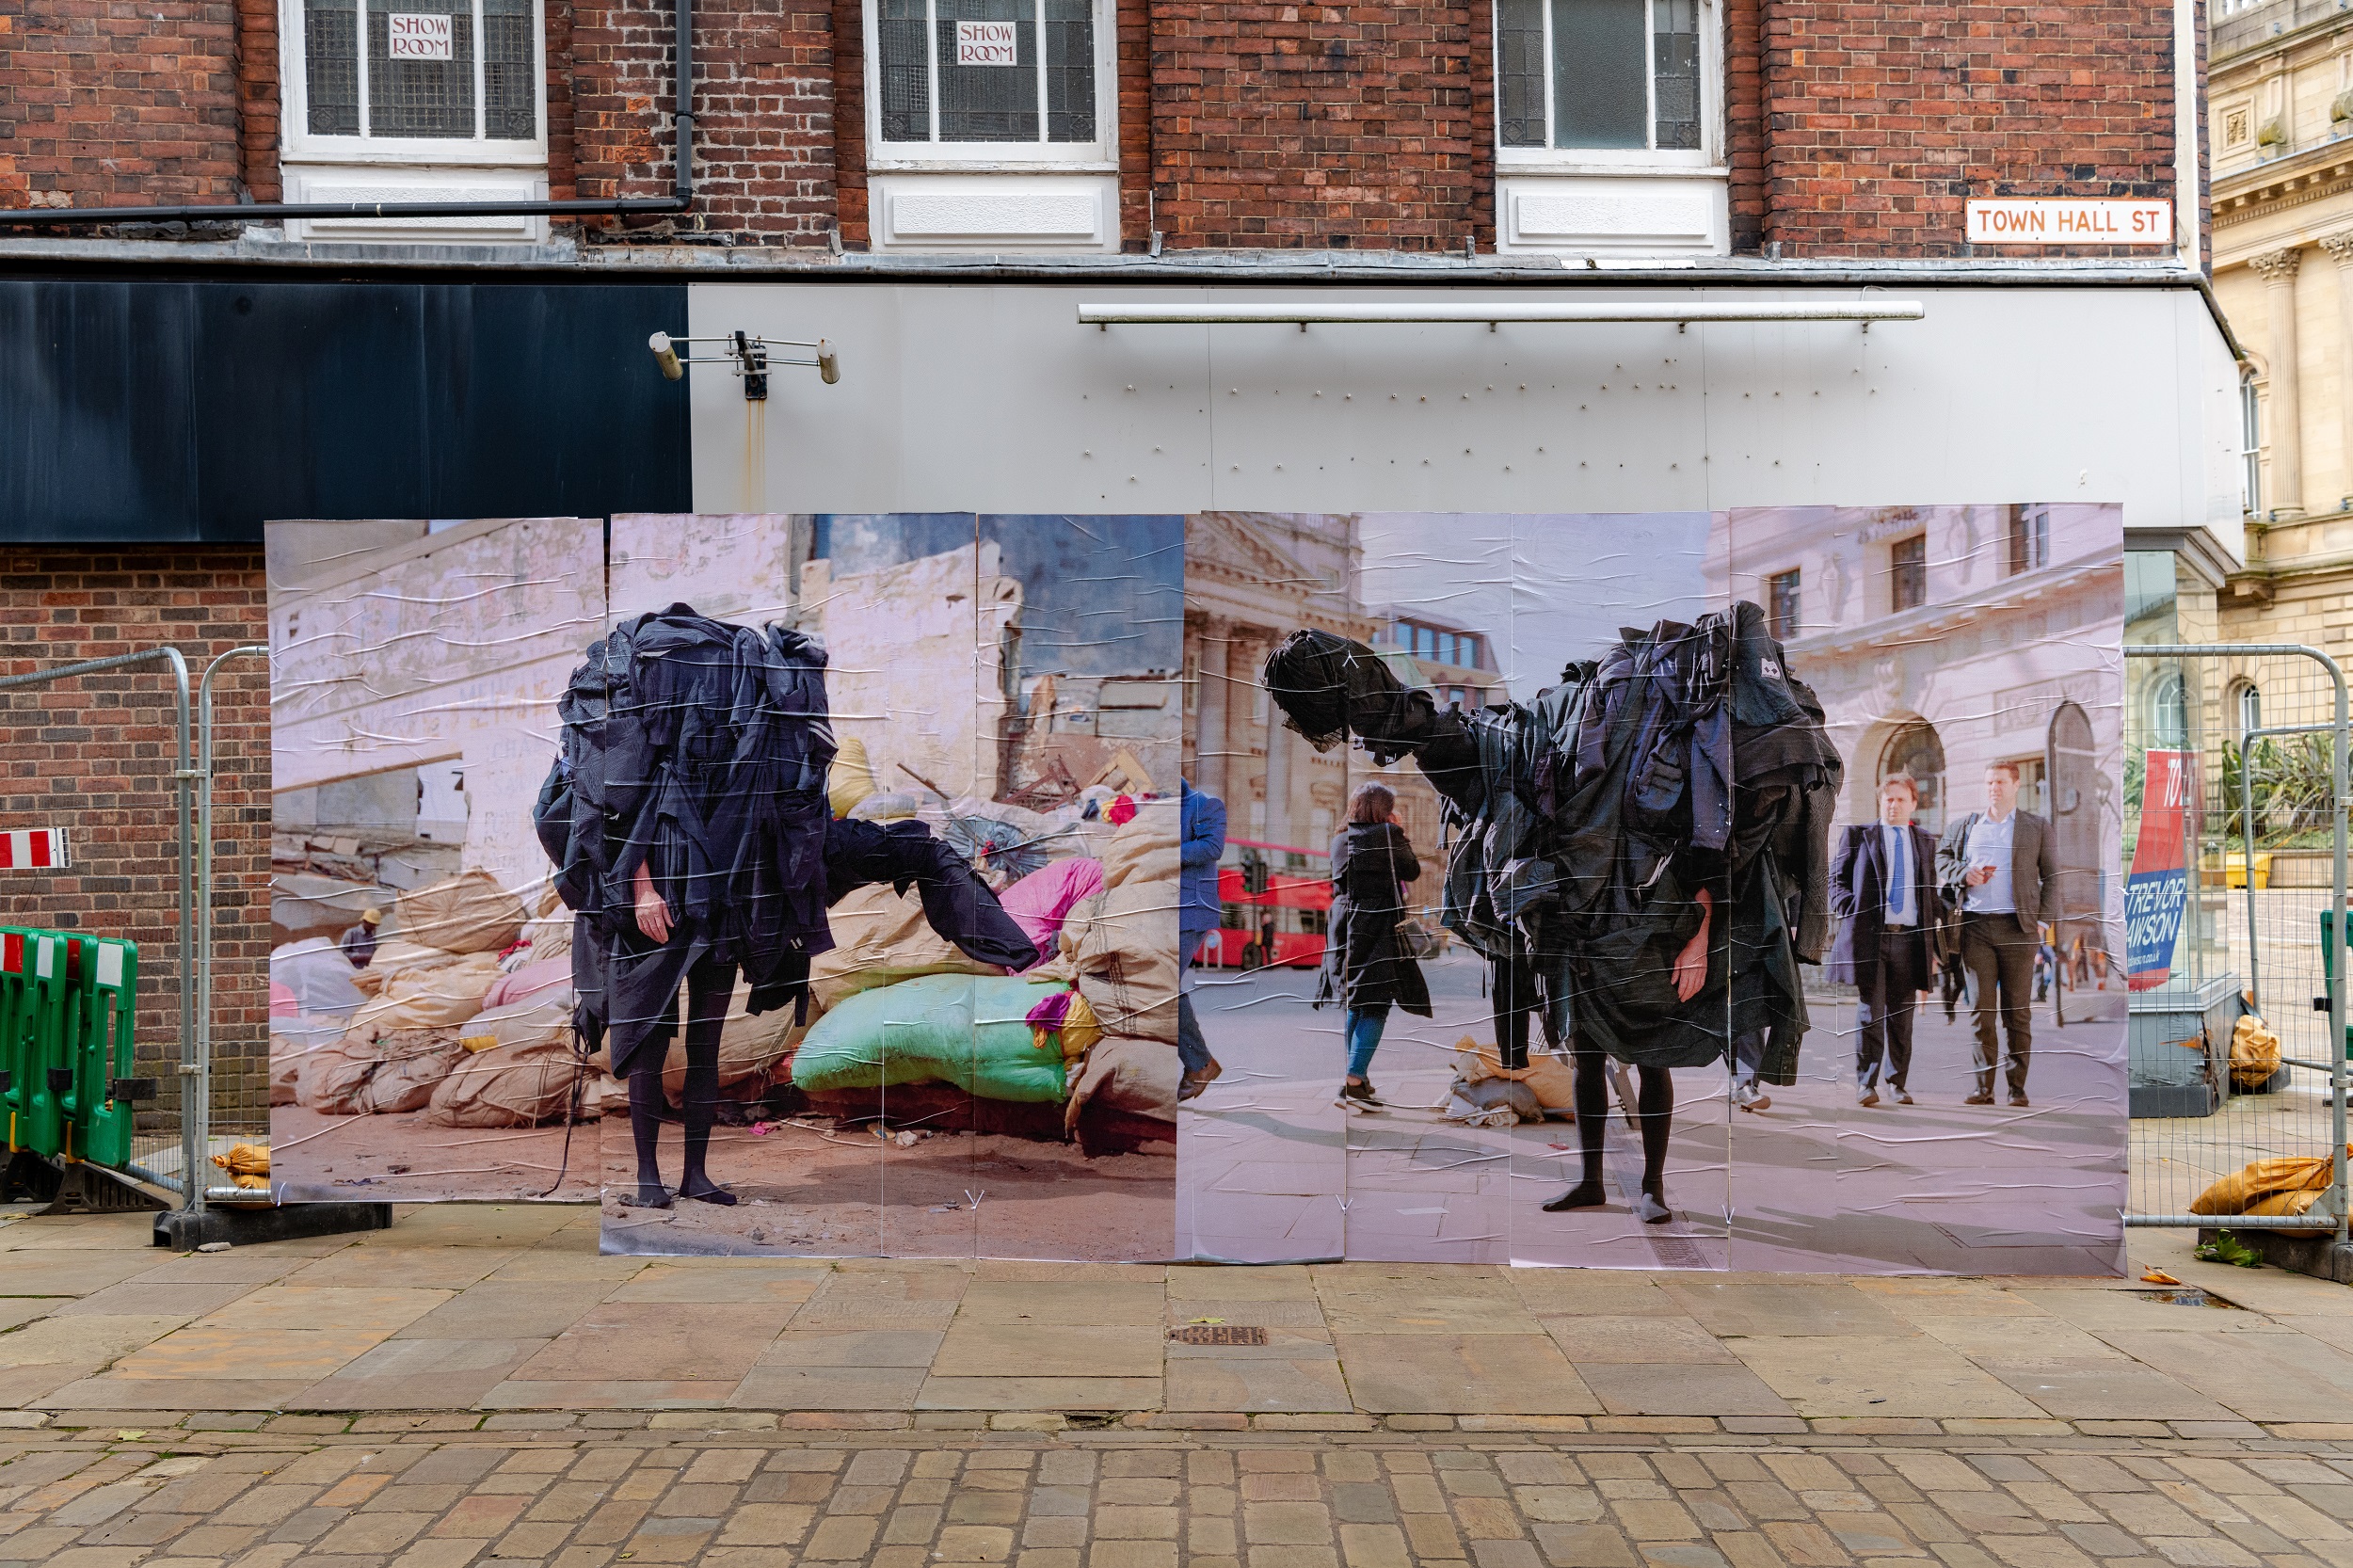 A construction hoarding on a town centre street pasted with two images from Hutchison's project, showing his zombie sculpture outfit made of black clothes, on the left in front of huge backs presumably full of second hand textiles and on the right in central London.